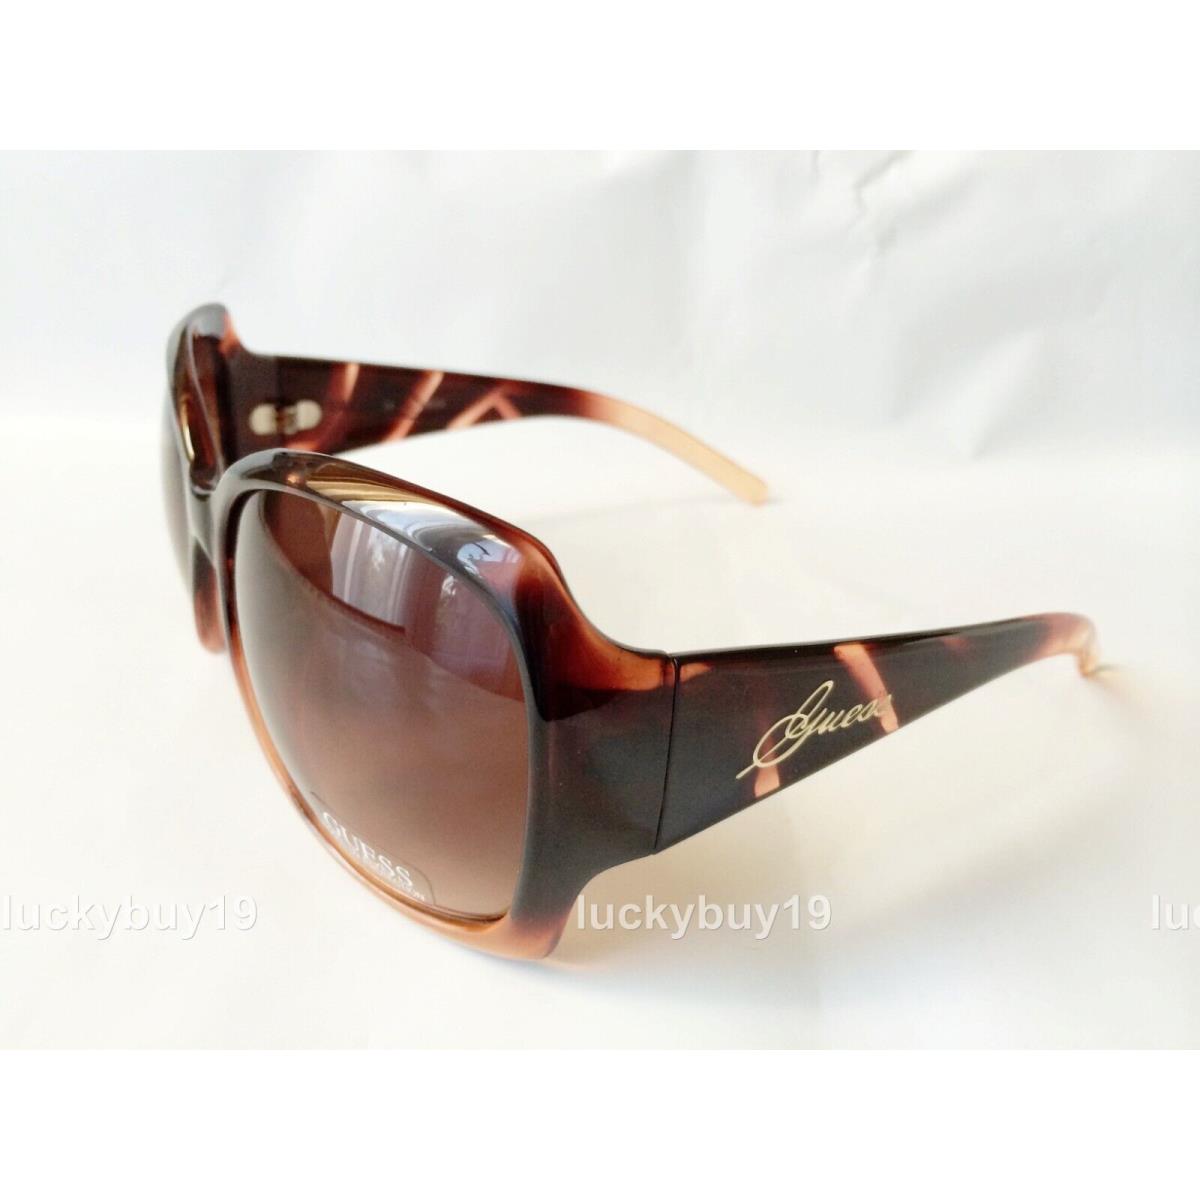 Guess sunglasses  - Brown Frame, Brown Lens 0